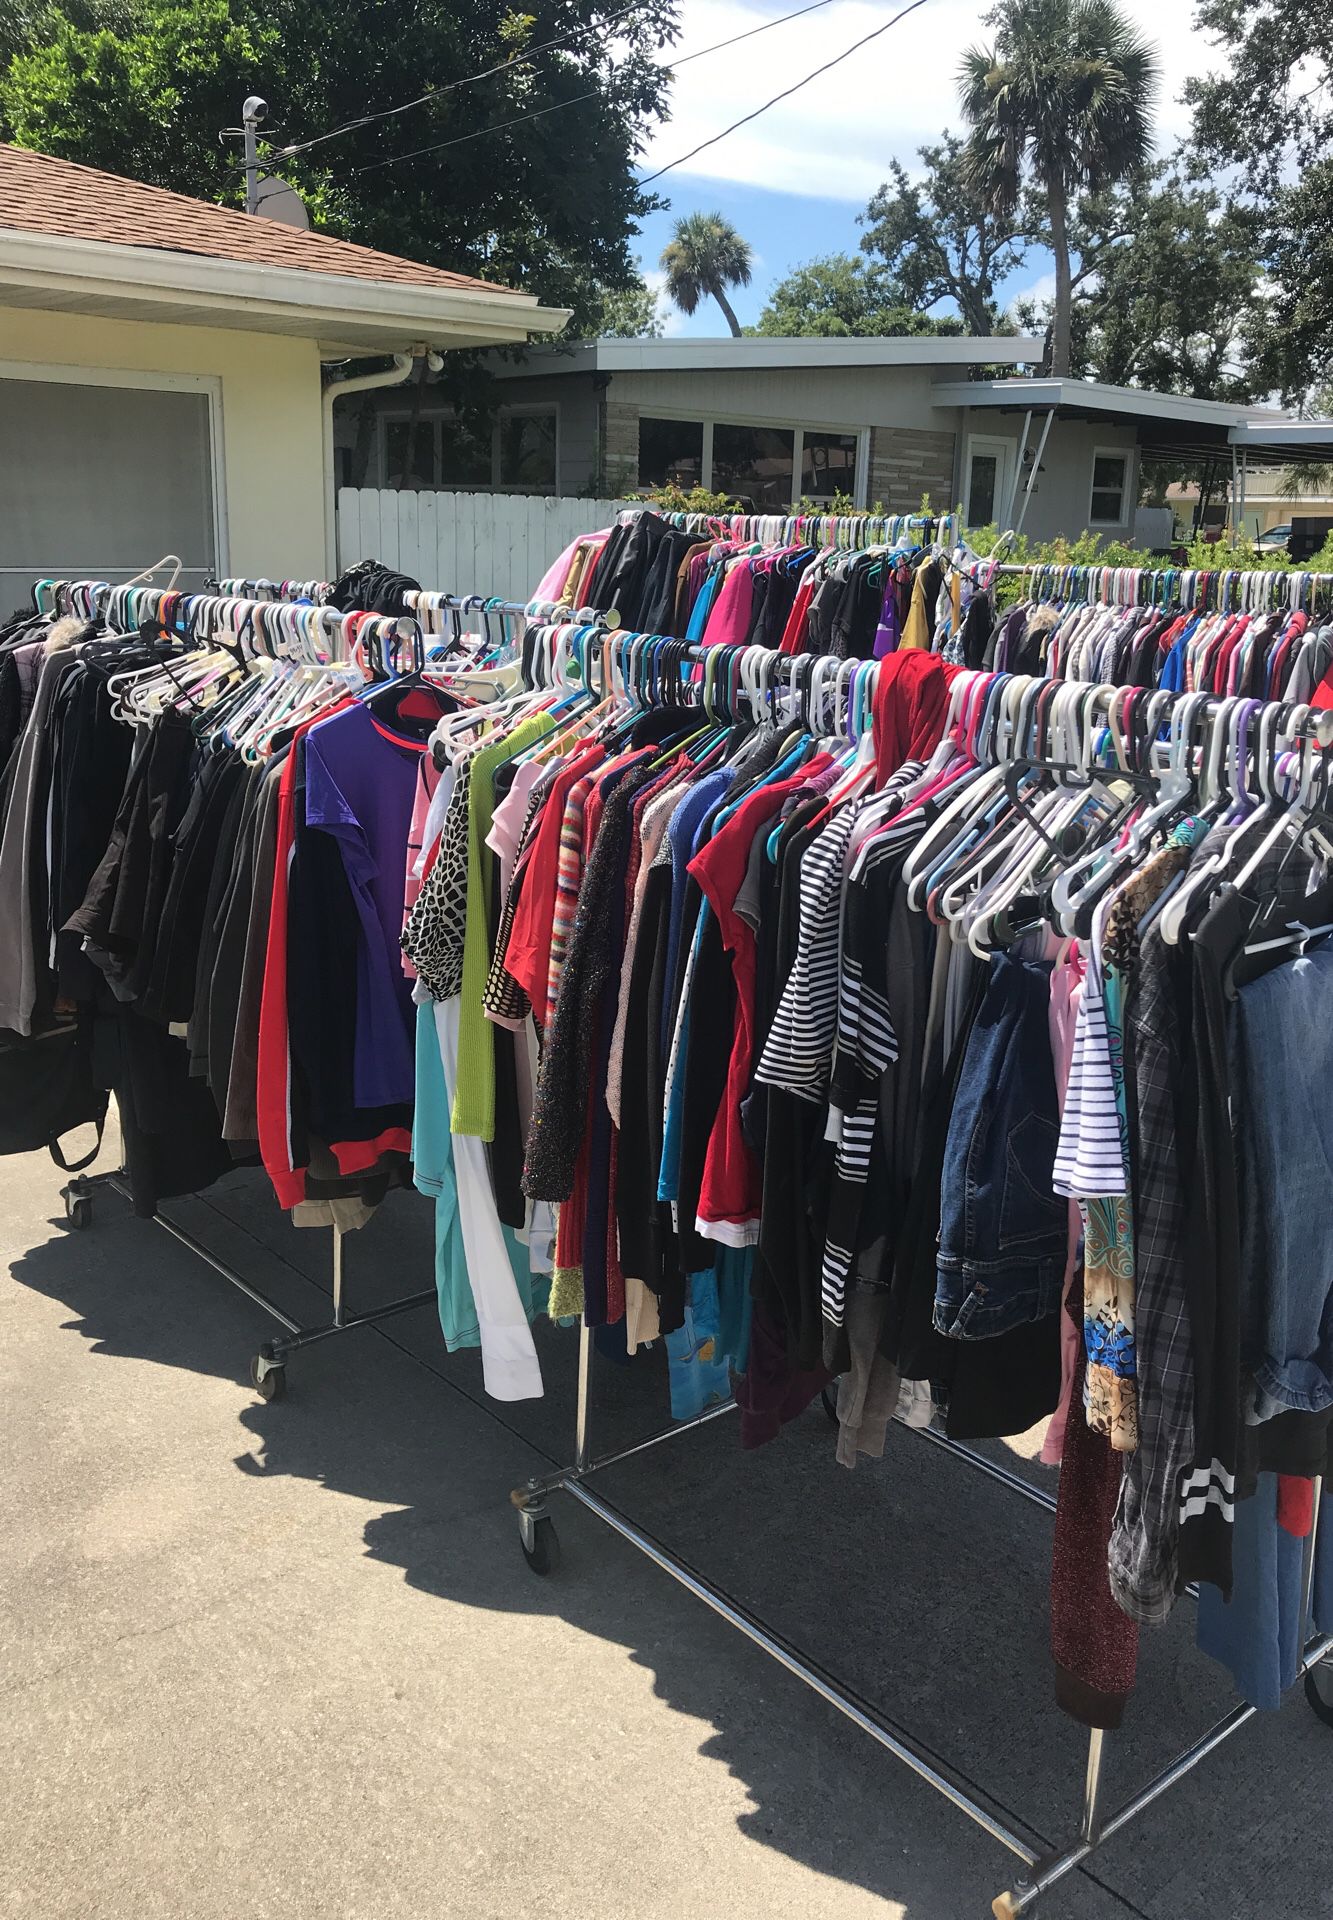 Clothing sale ! Lots and lots of items shirts $1.00 pants $2.00jeans $2.00 dresses $3.00 and up leathers $20.00 shoes $2.00 and up